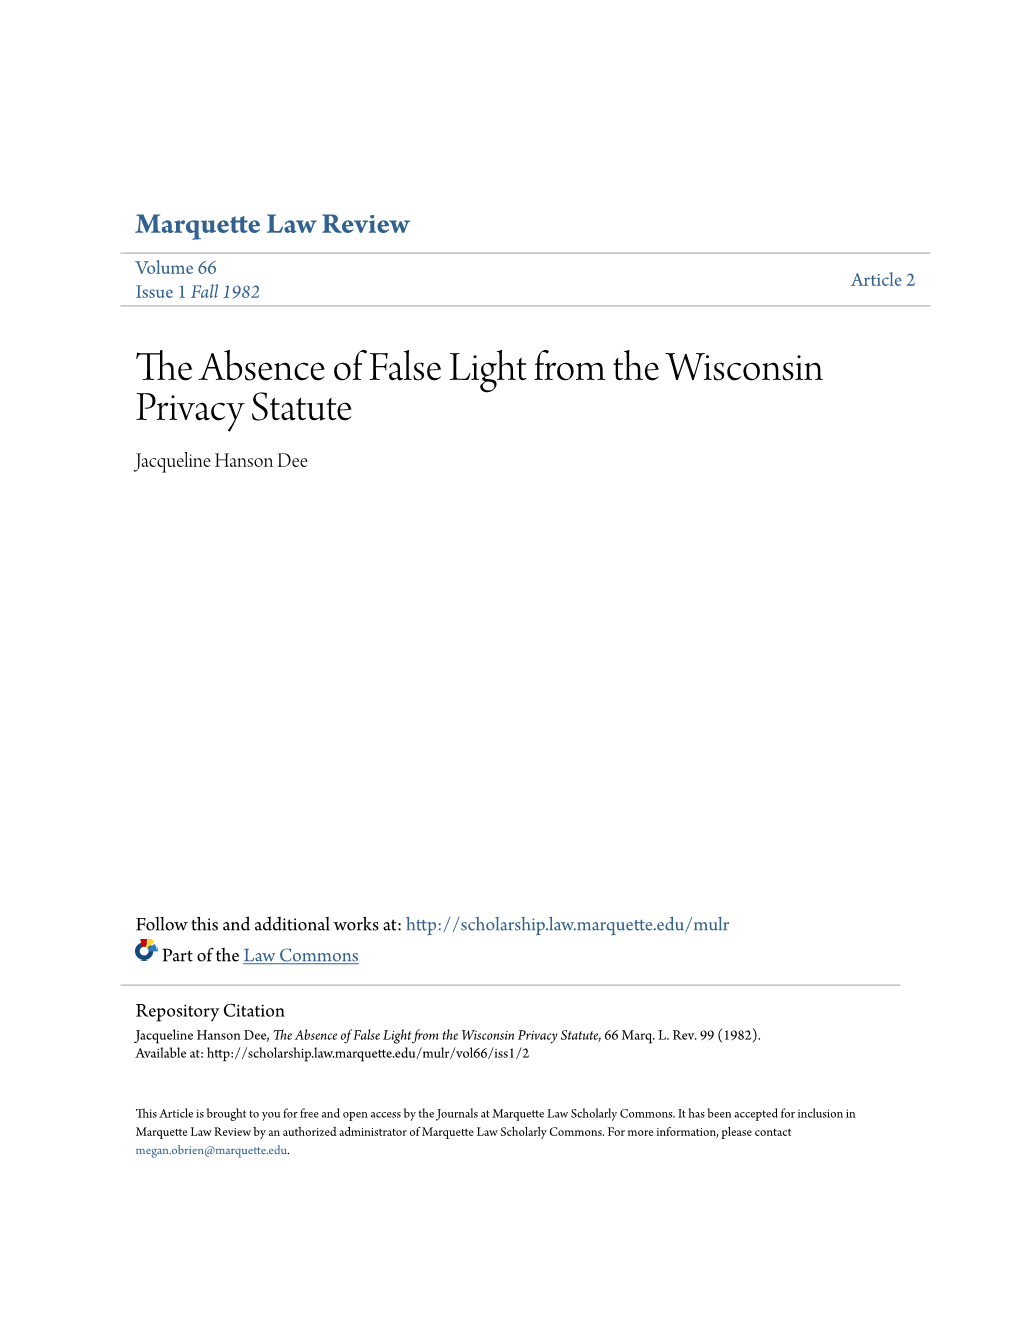 The Absence of False Light from the Wisconsin Privacy Statute Jacqueline Hanson Dee